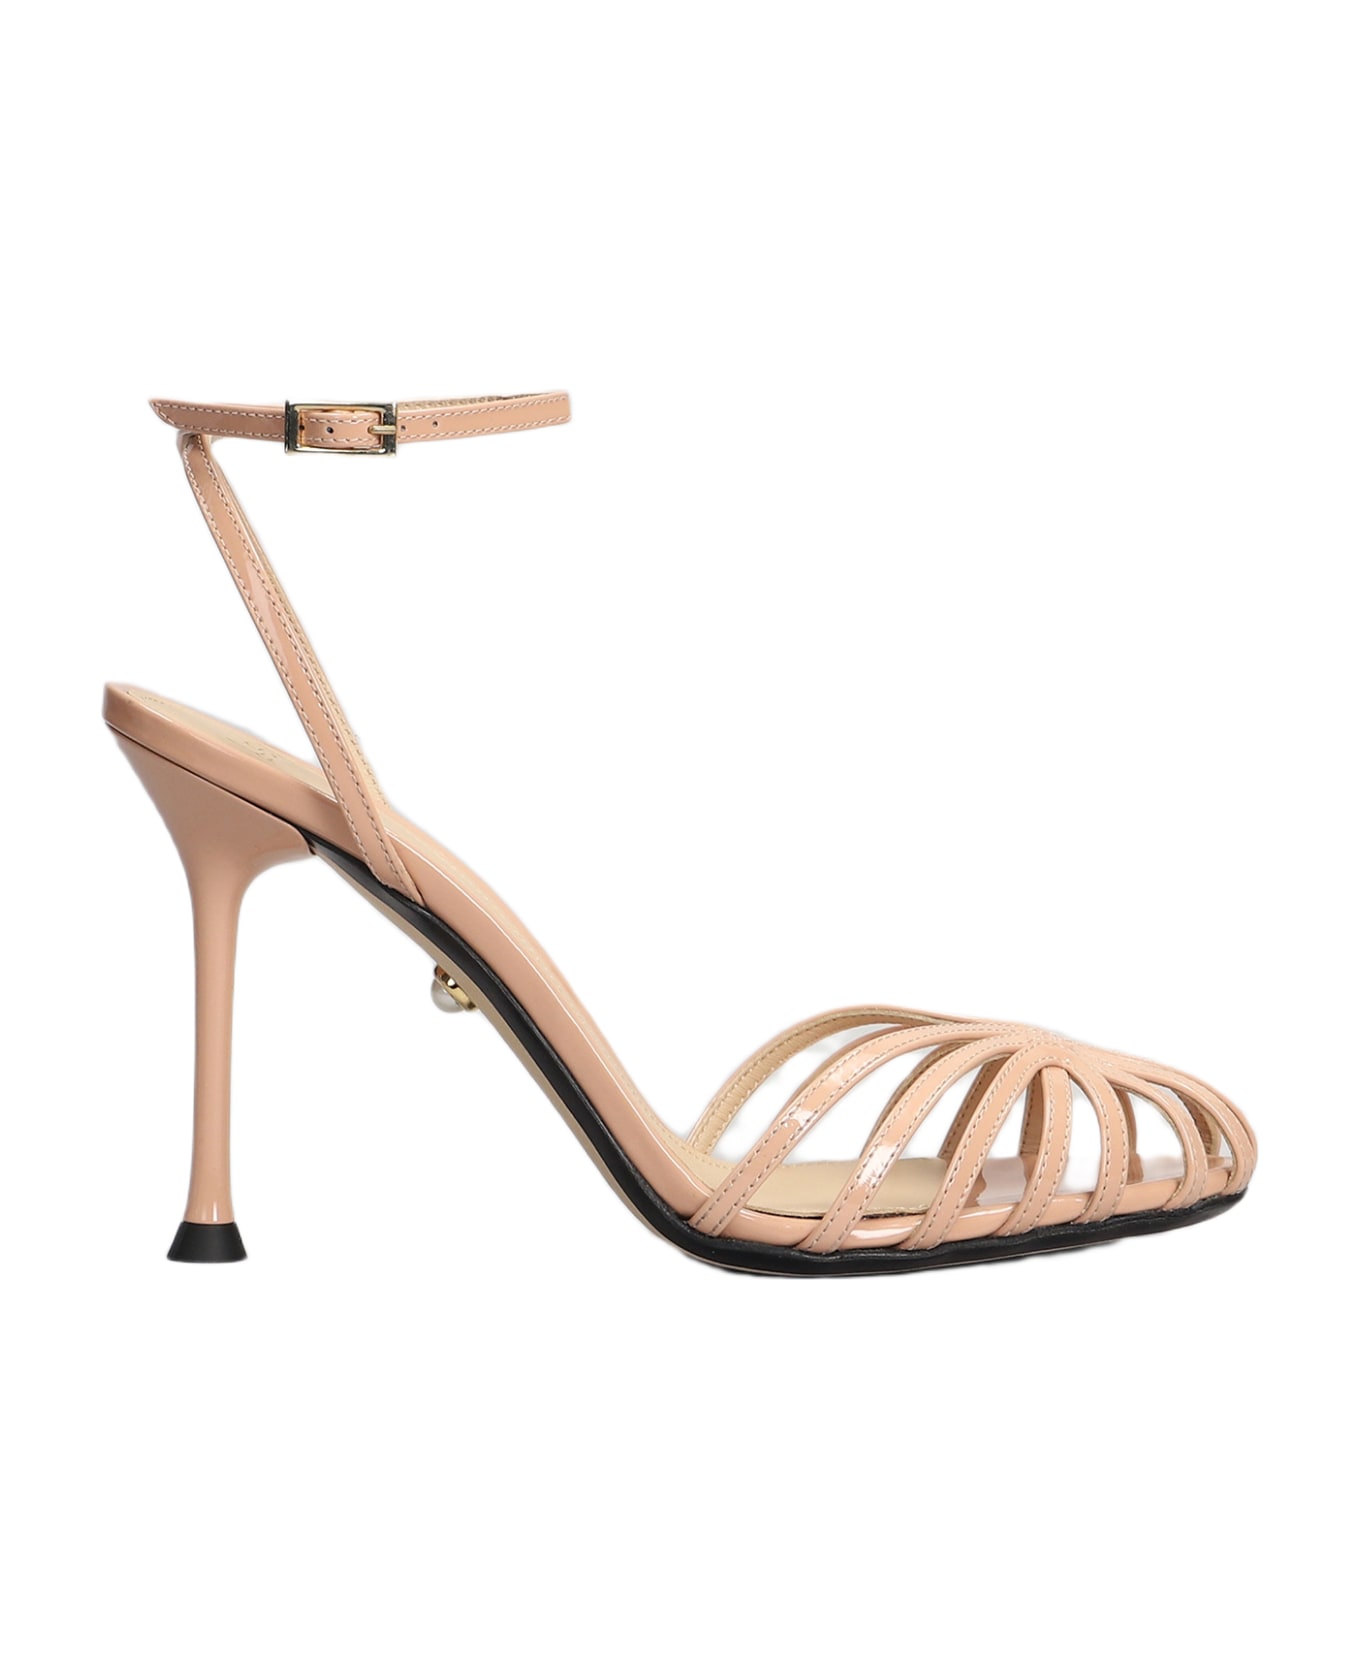 Alevì Ally 095 Sandals In Powder Patent Leather - powder